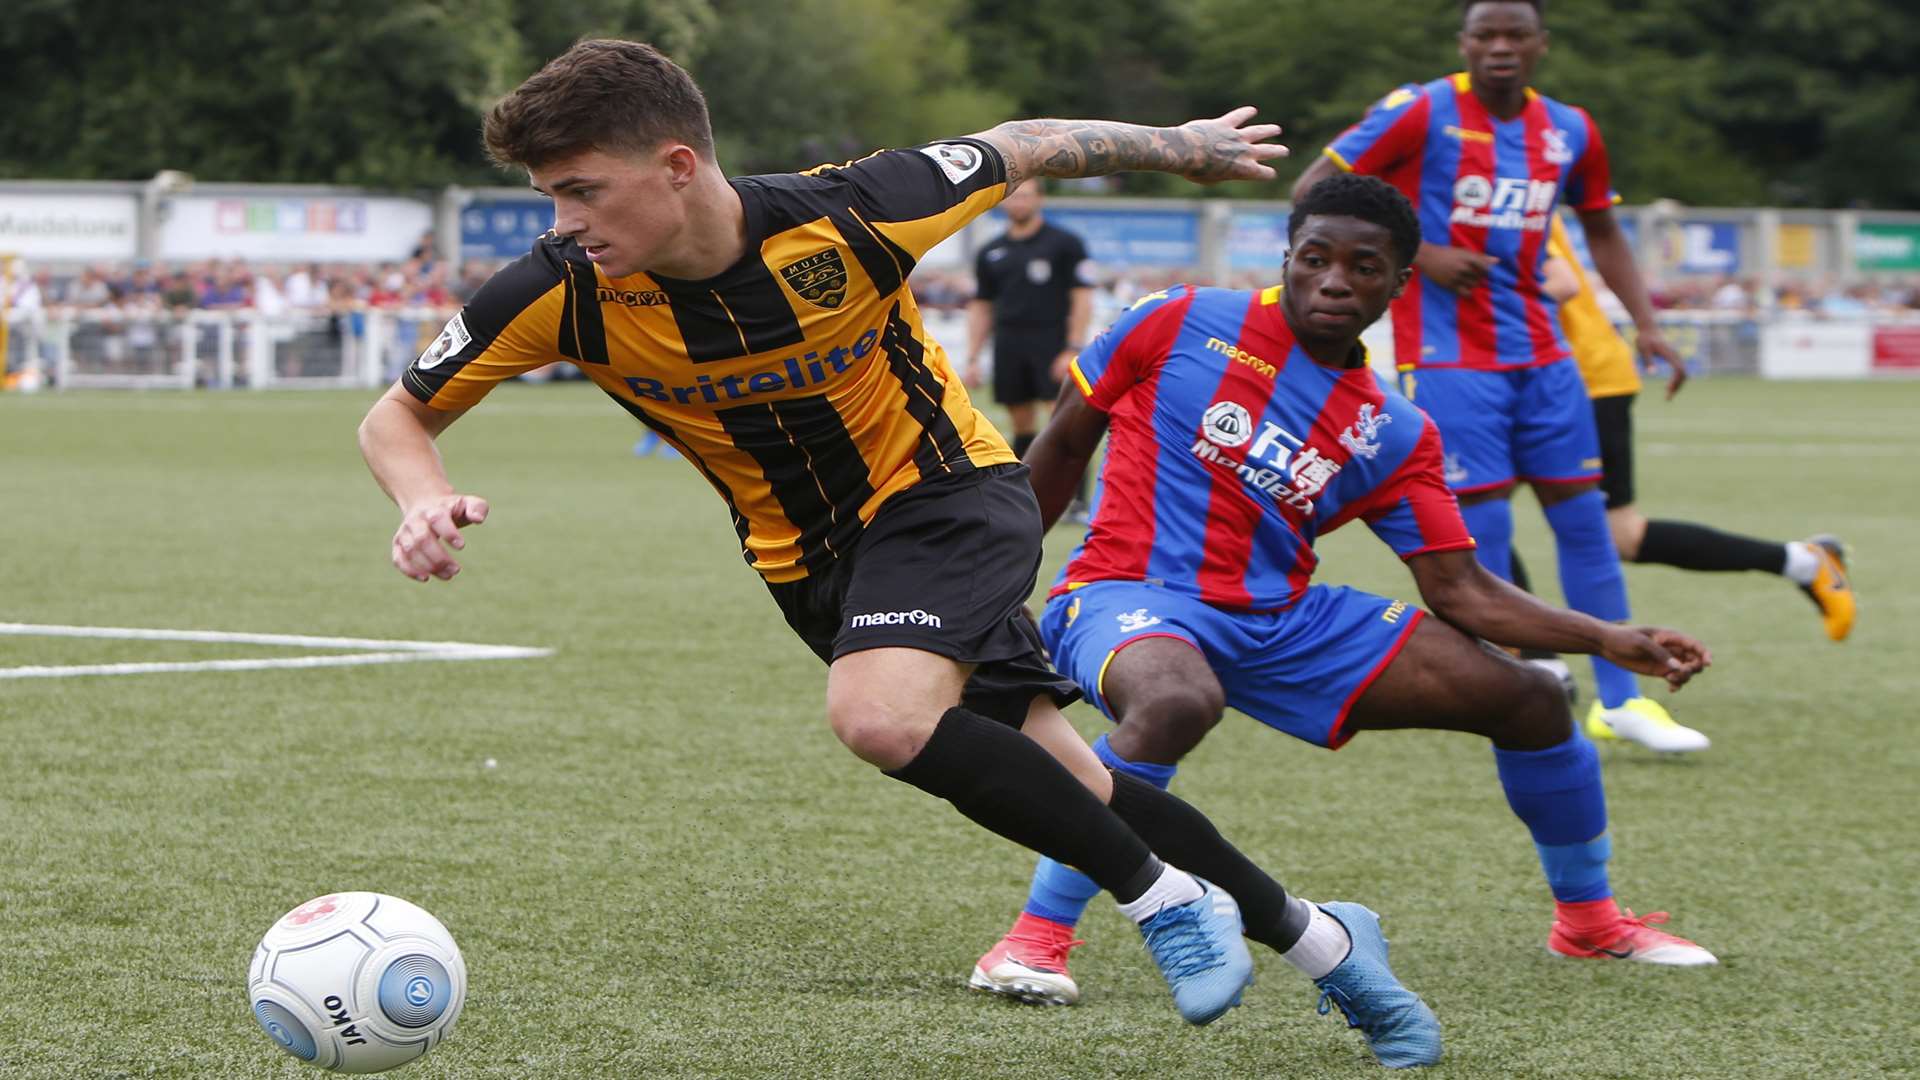 Jack Paxman shows quick feet to evade a Palace challenge Picture: Andy Jones